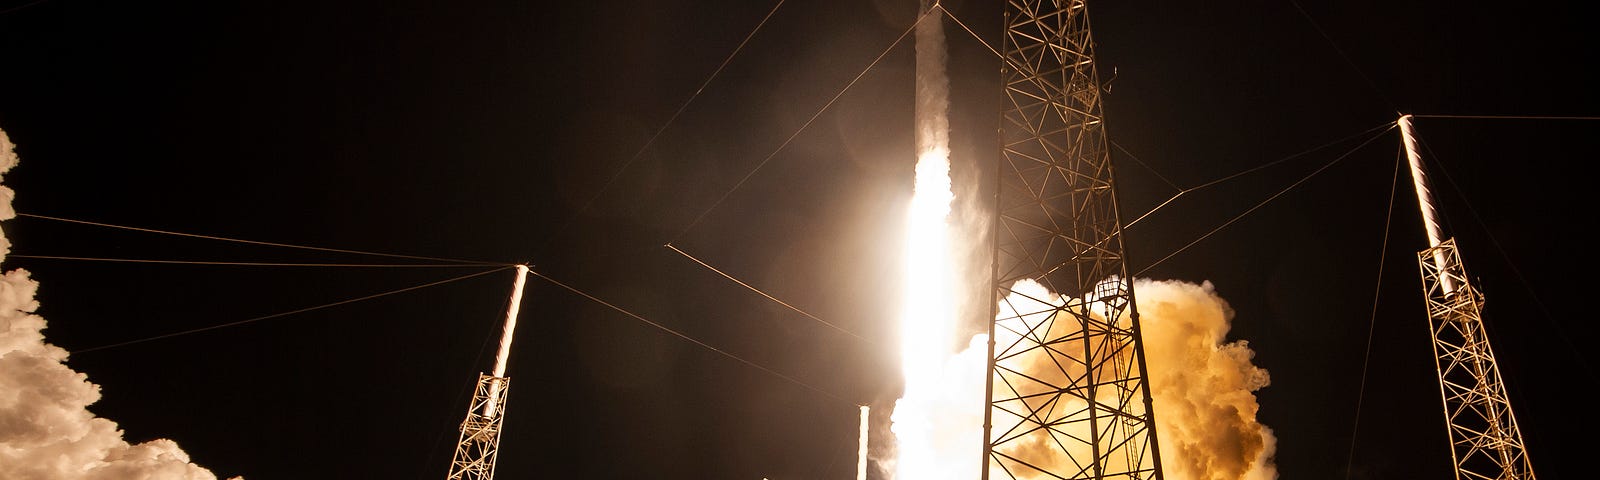 Photo of Liftoff of SpaceX’s CRS-17 Dragon Cargo Craft on May 4, 2020